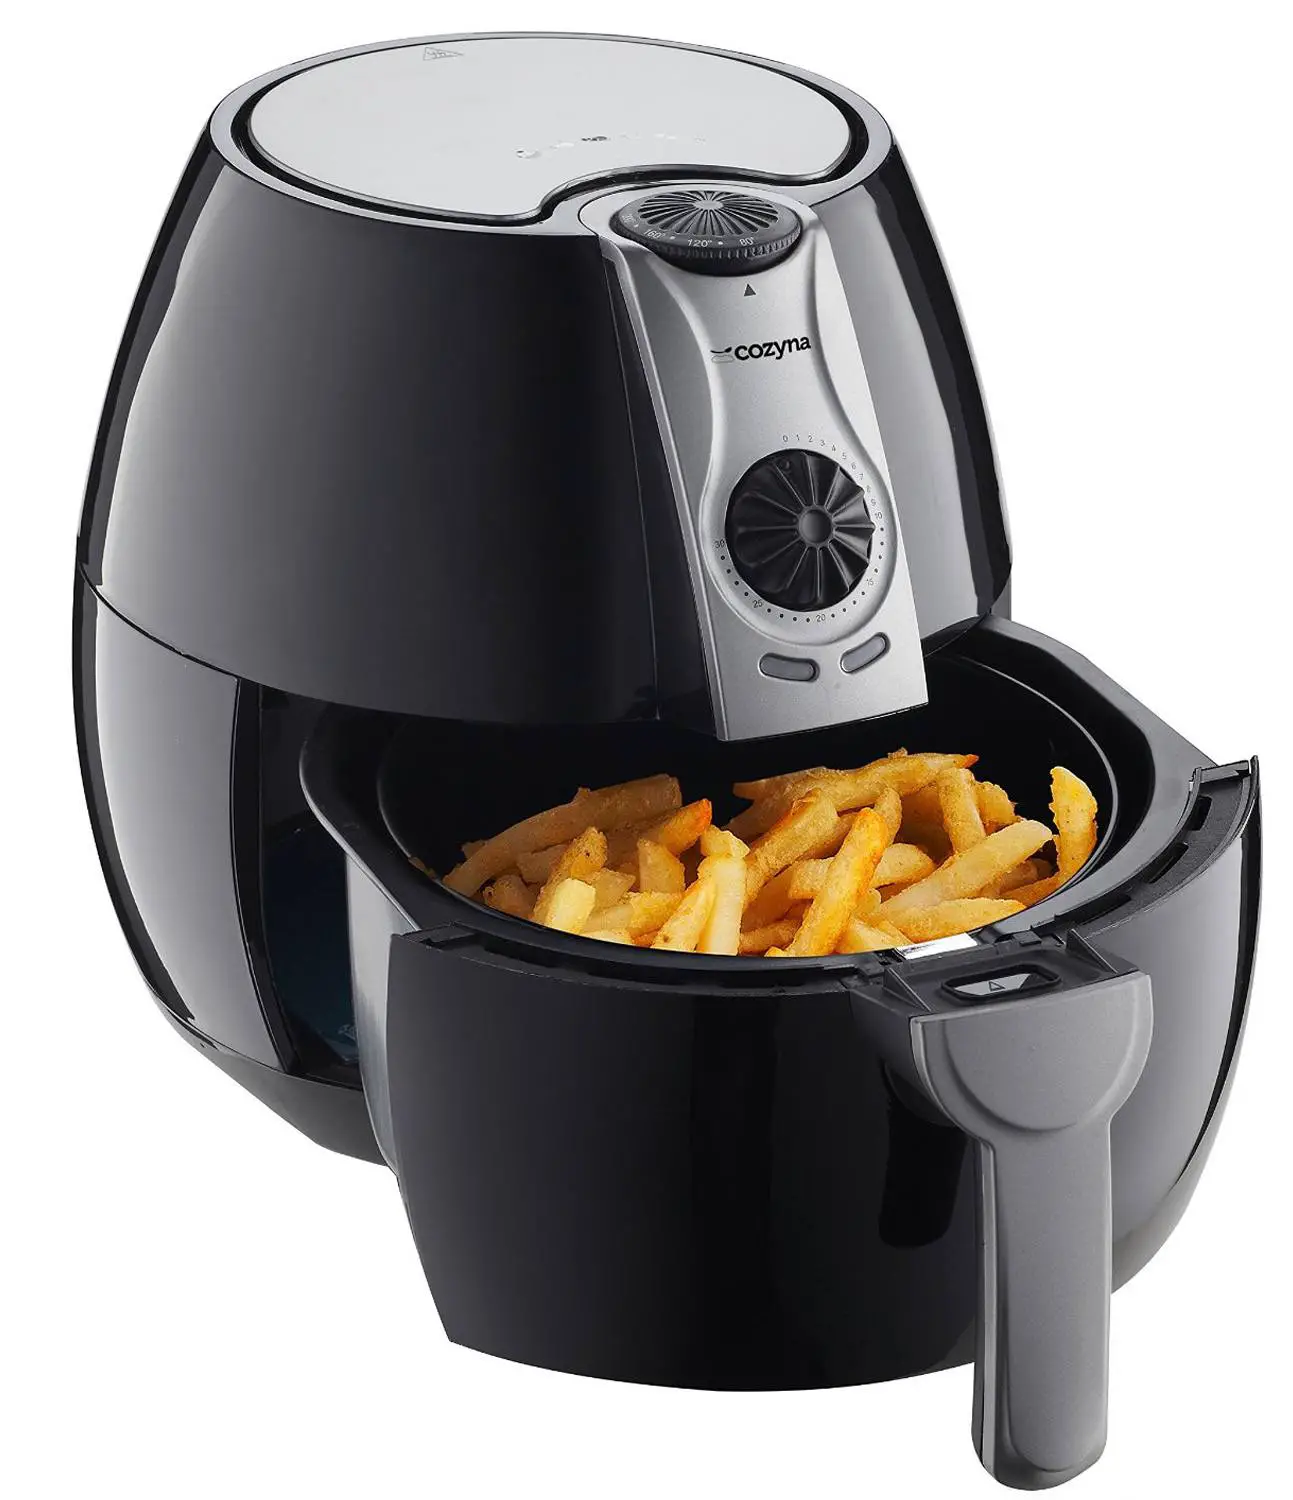 The 5 Best Air Fryer Brands for 2017 (Buying Guide ...